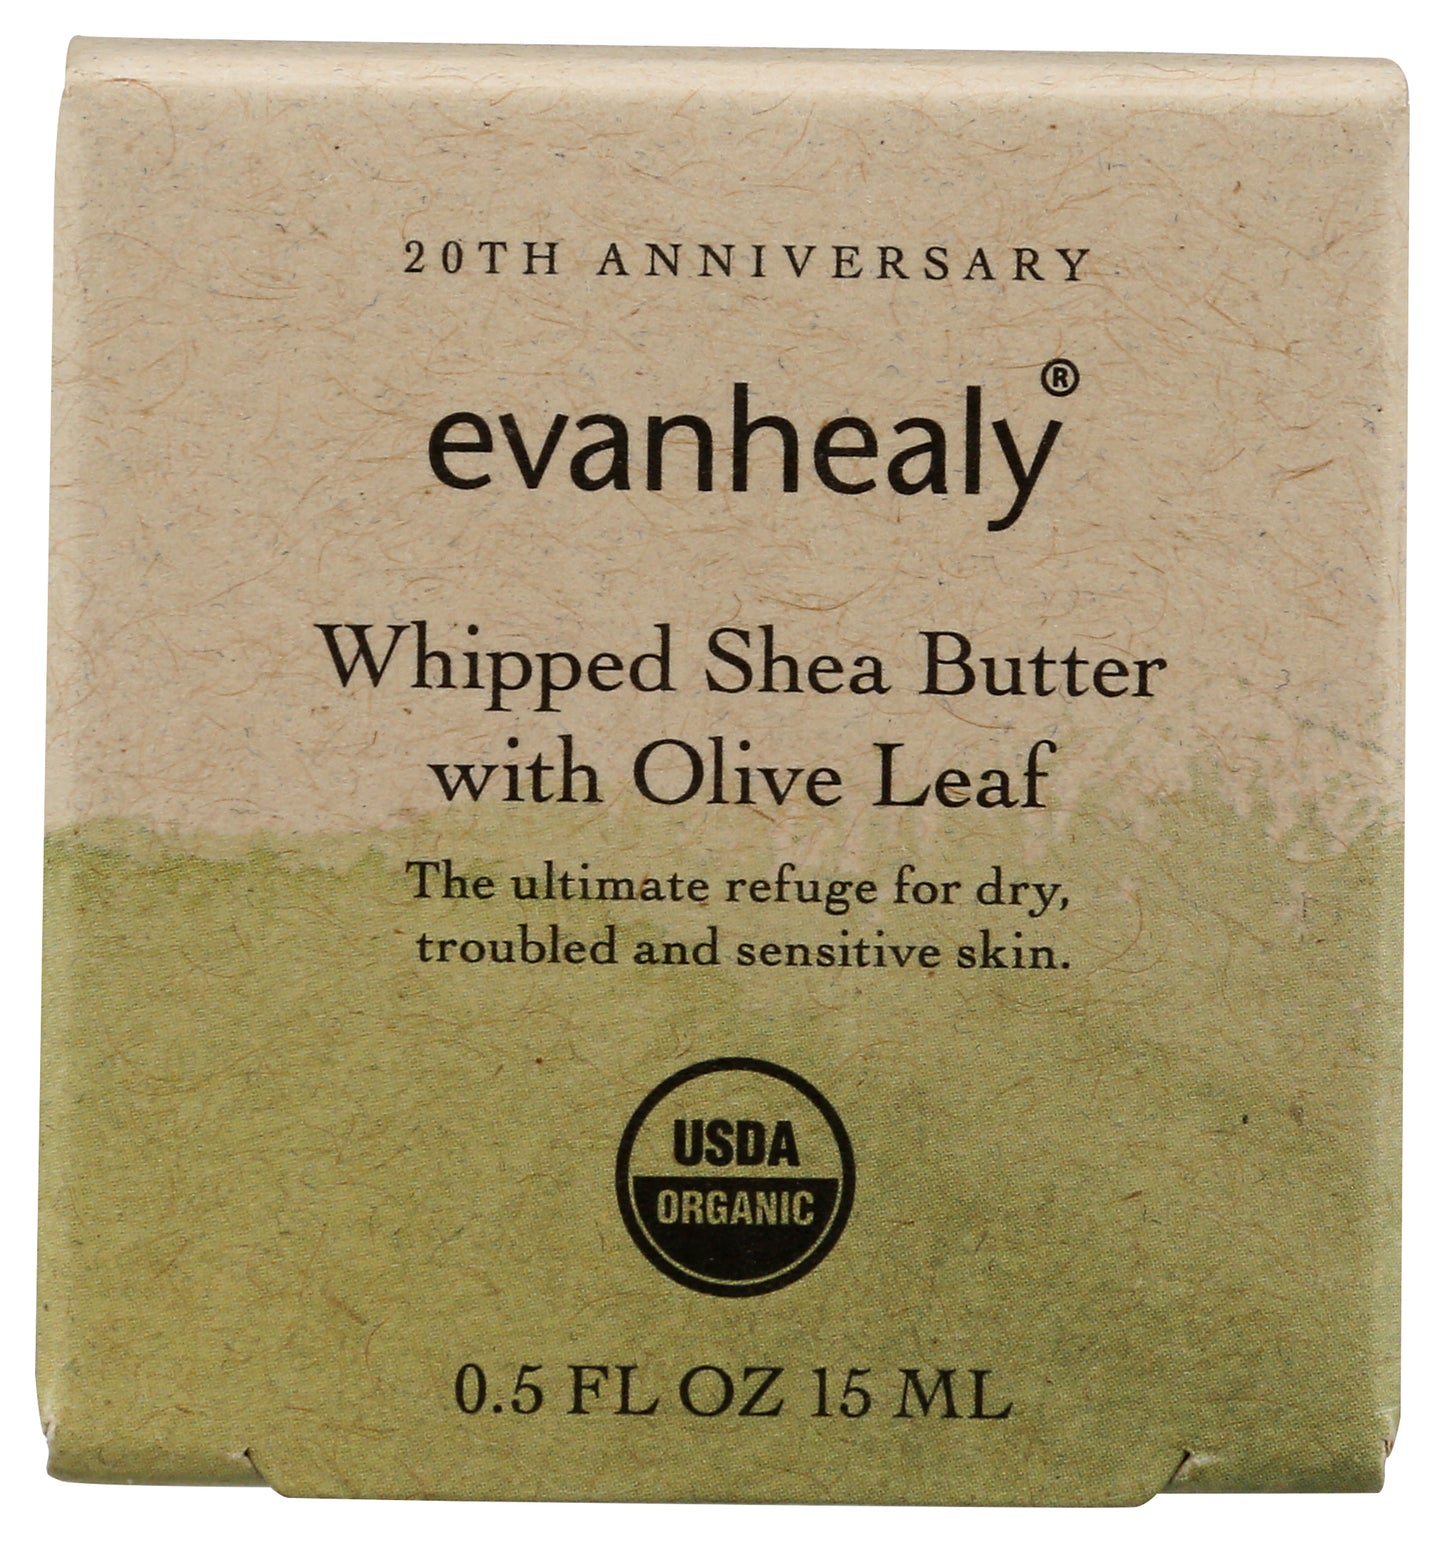 evanhealy Whipped Shea Butter with Olive Leaf 1.9 Fl. Oz. Front